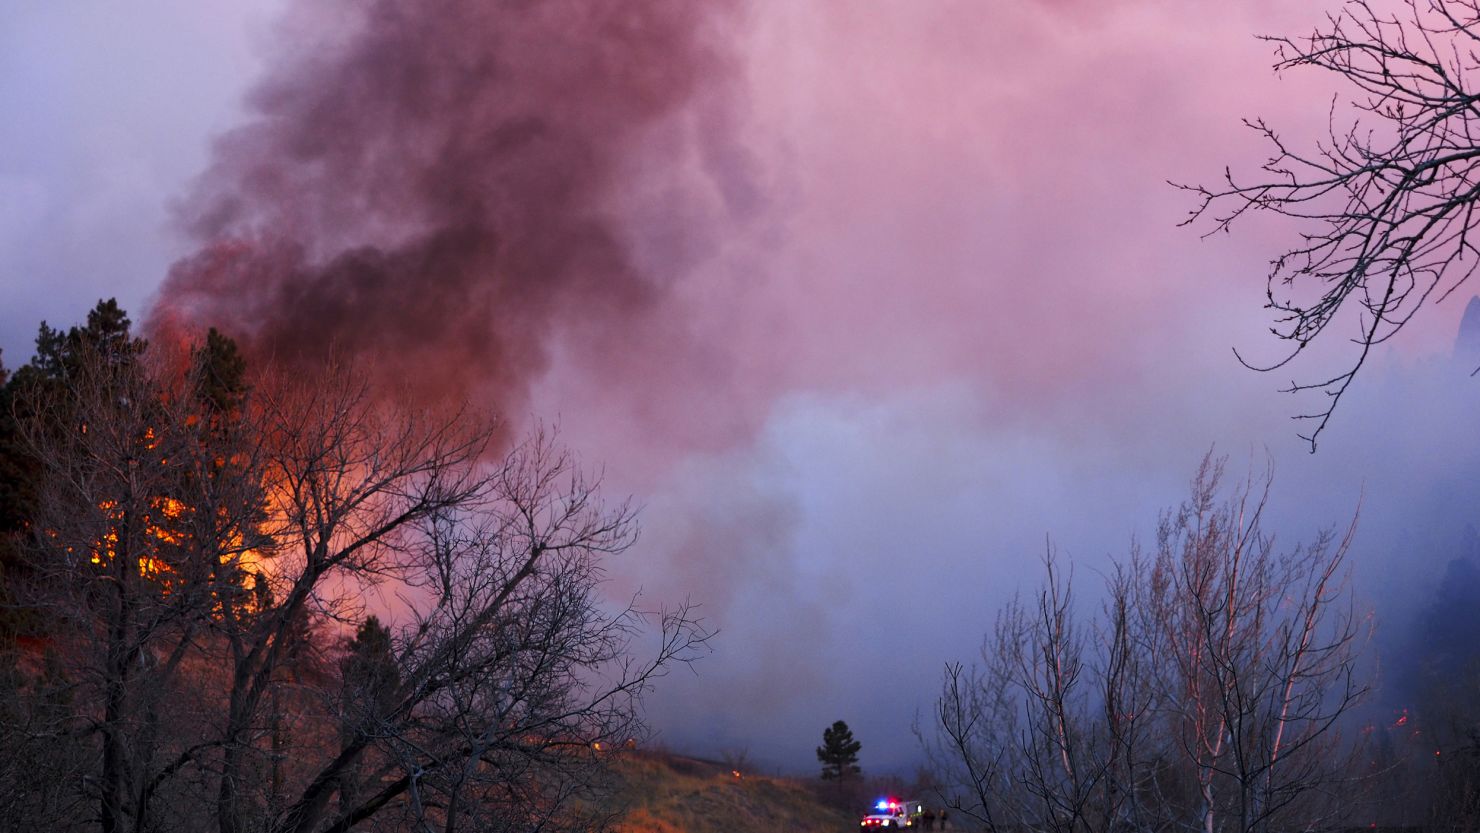 Smoke rises from a wildfire Sunday, March 19, 2017, in Boulder, Colorado. Authorities said the small wildfire burning in the mountains forced people from their homes and is filling the sky with smoke.